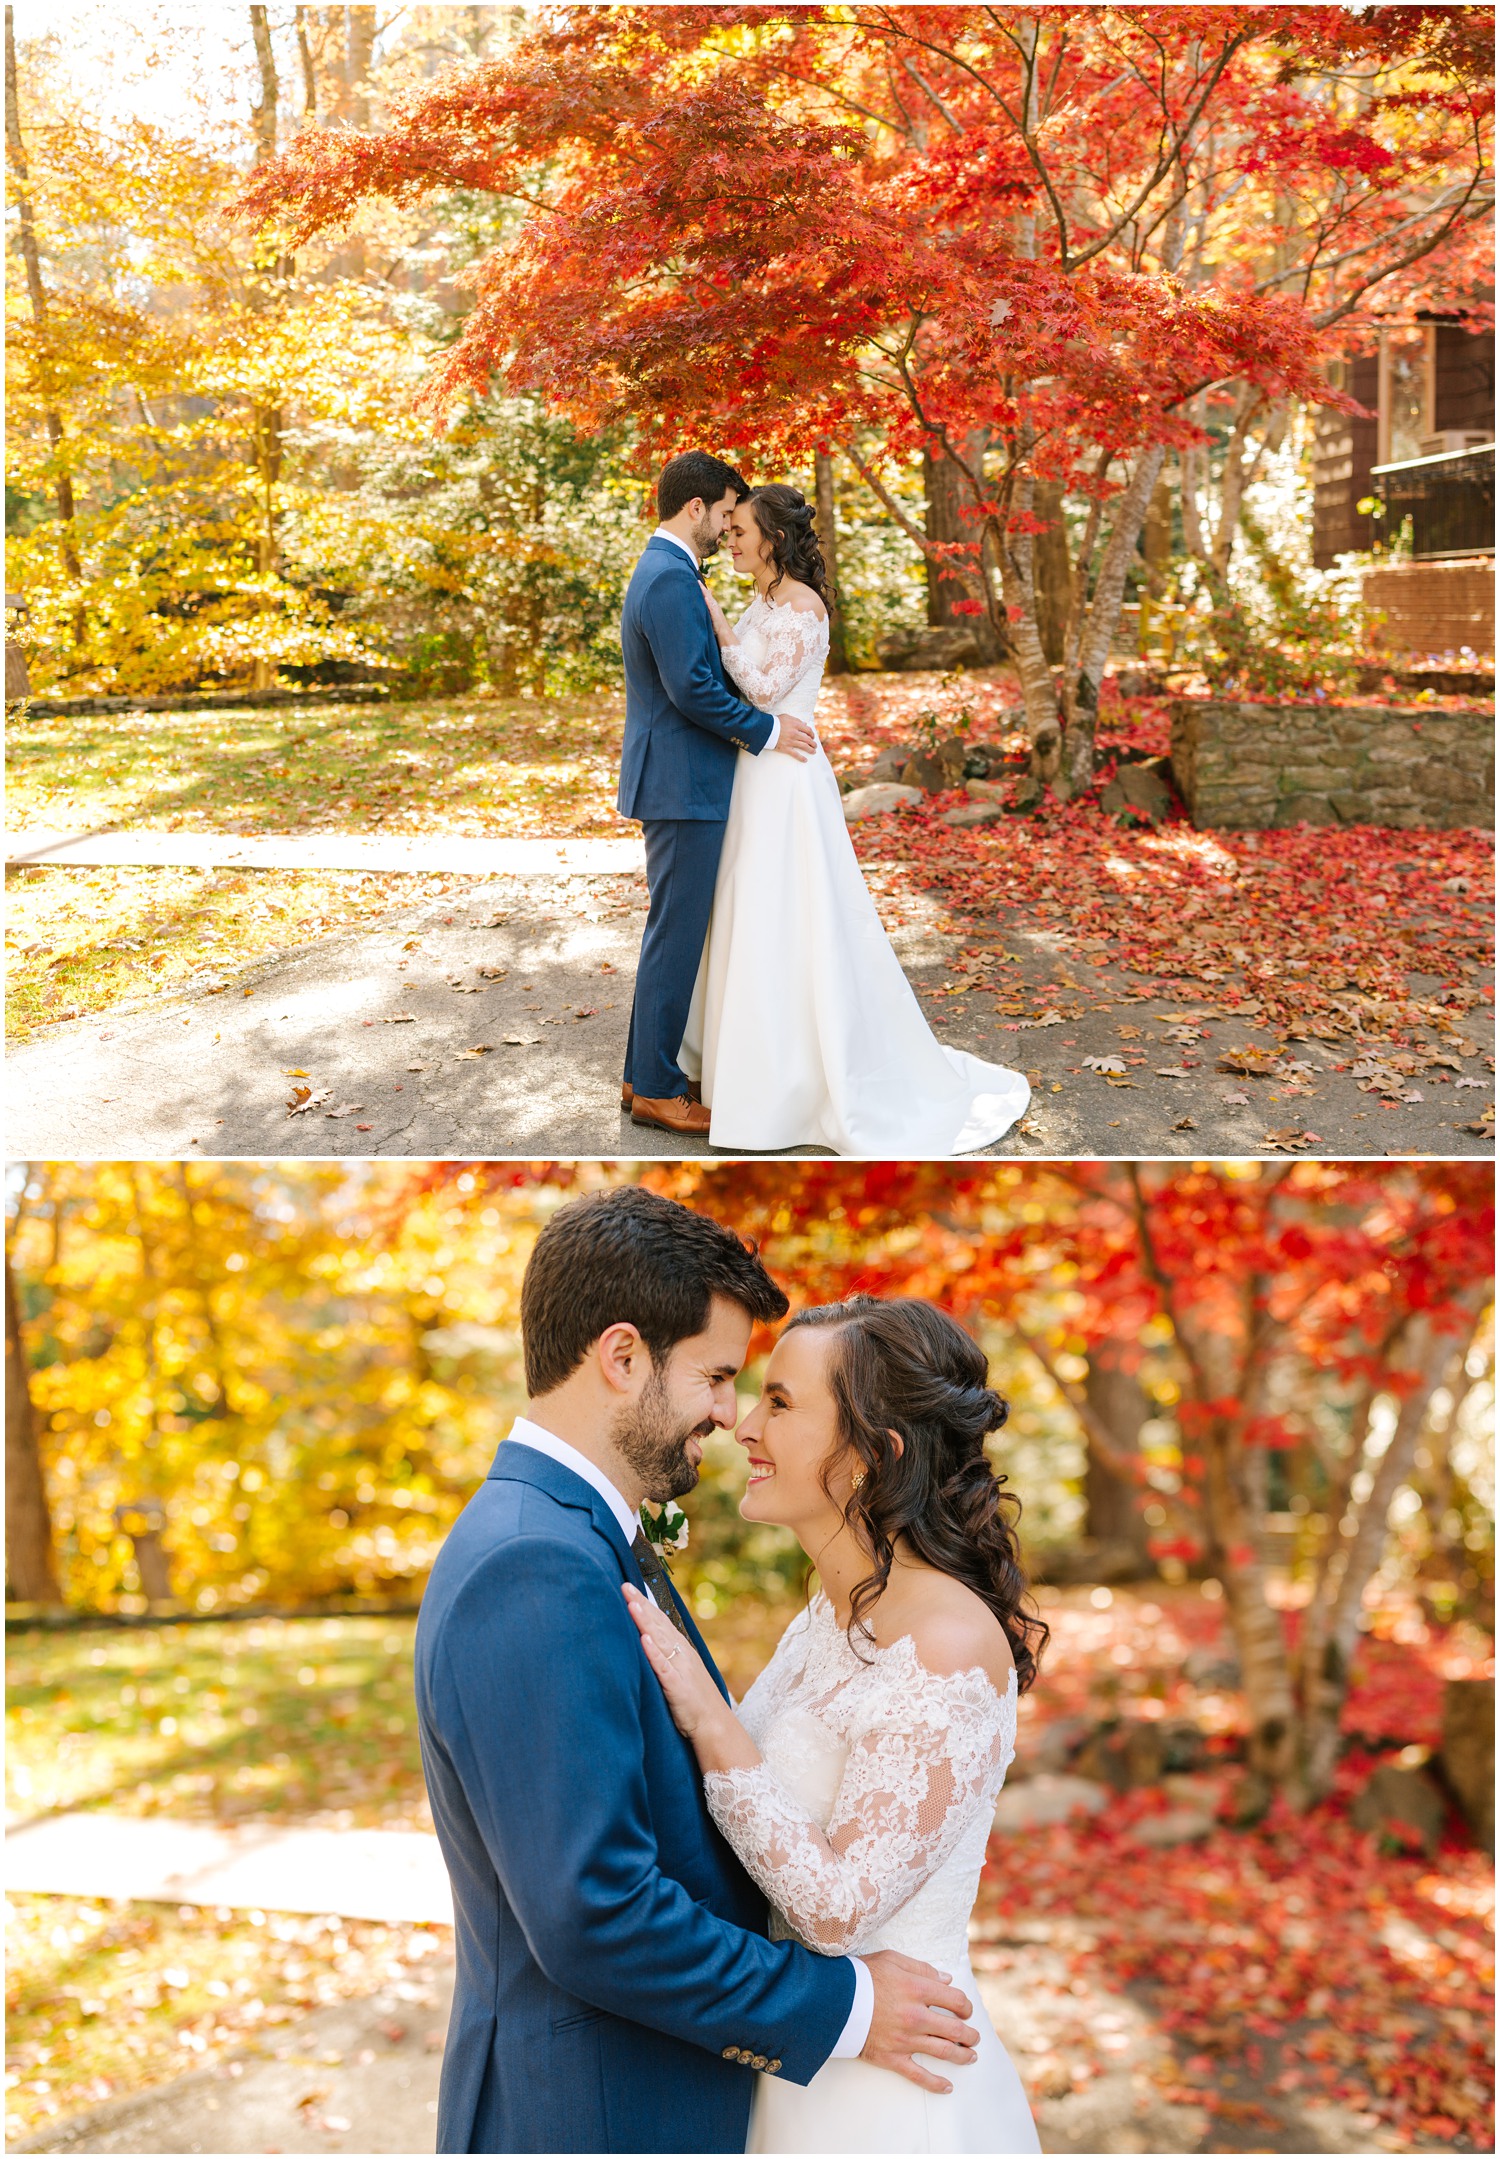 wedding portraits by tree with bright red leaves in AVL